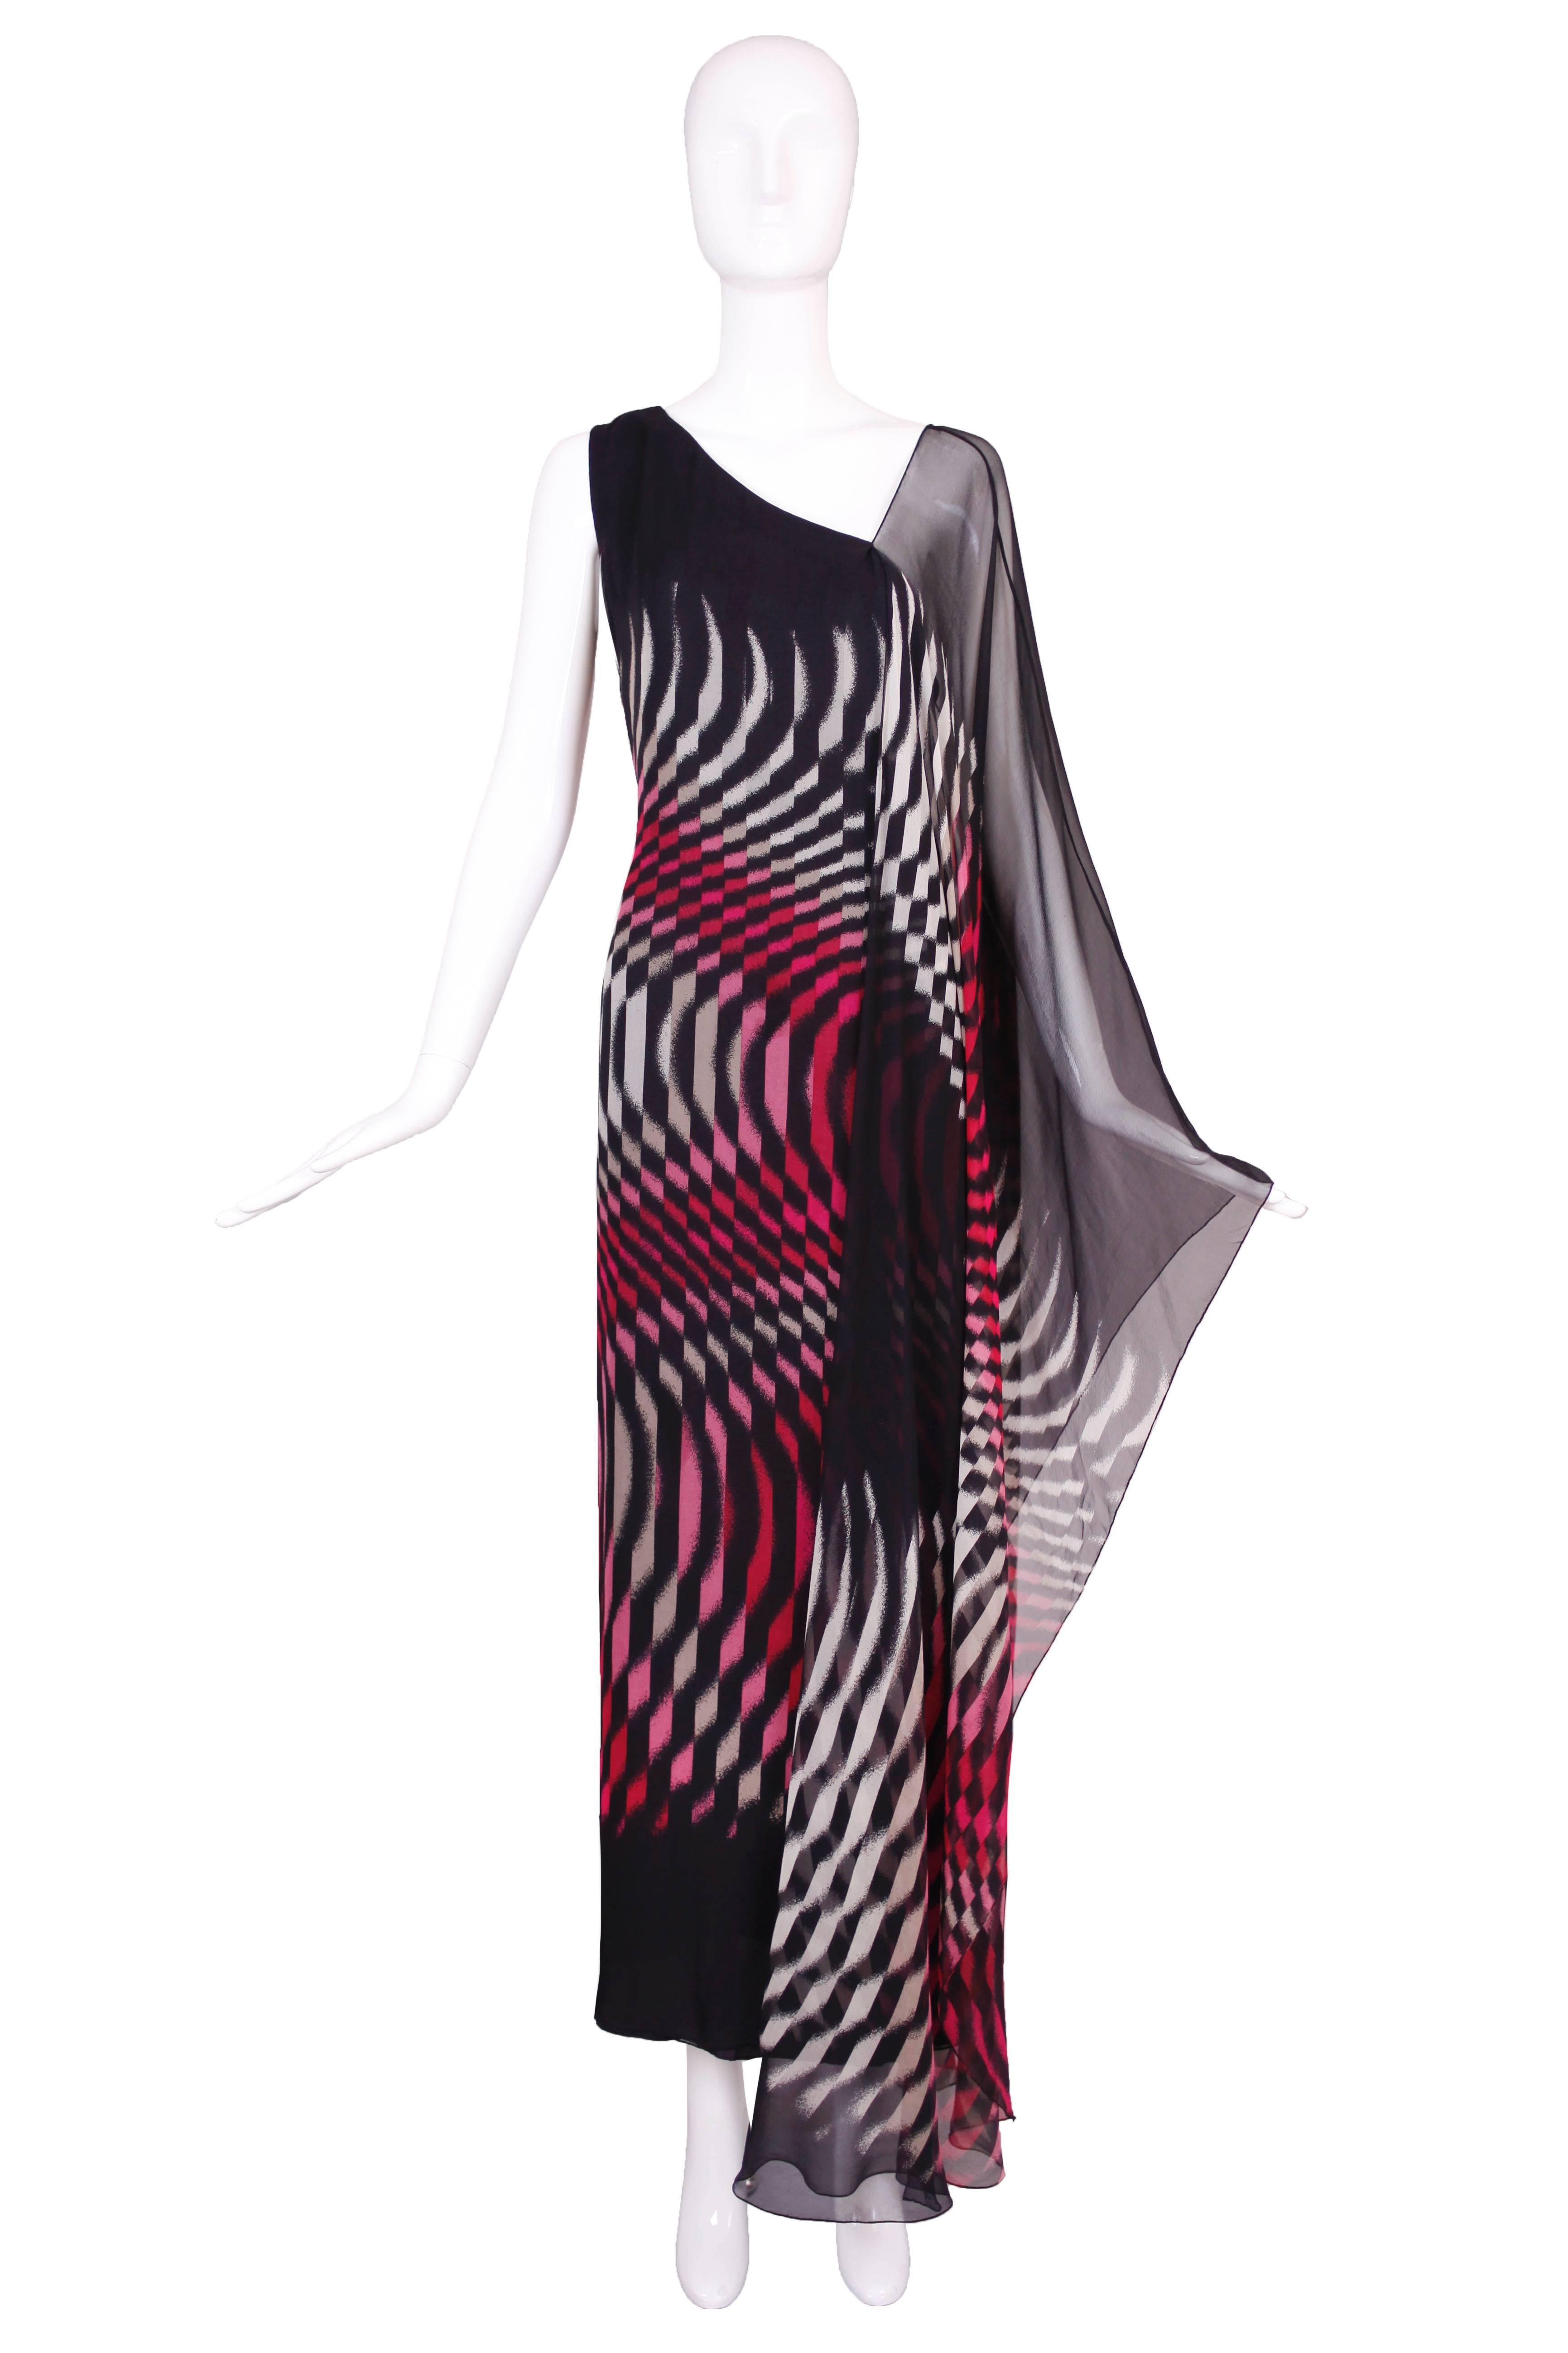 Hanae Mori double layered silk chiffon gown in a geometric pattern of pink, grey, red and black. One shoulder fabricated from a floor-length chiffon scarf that attaches to the dress via a side seam down the length of the back. Cut on the bias and